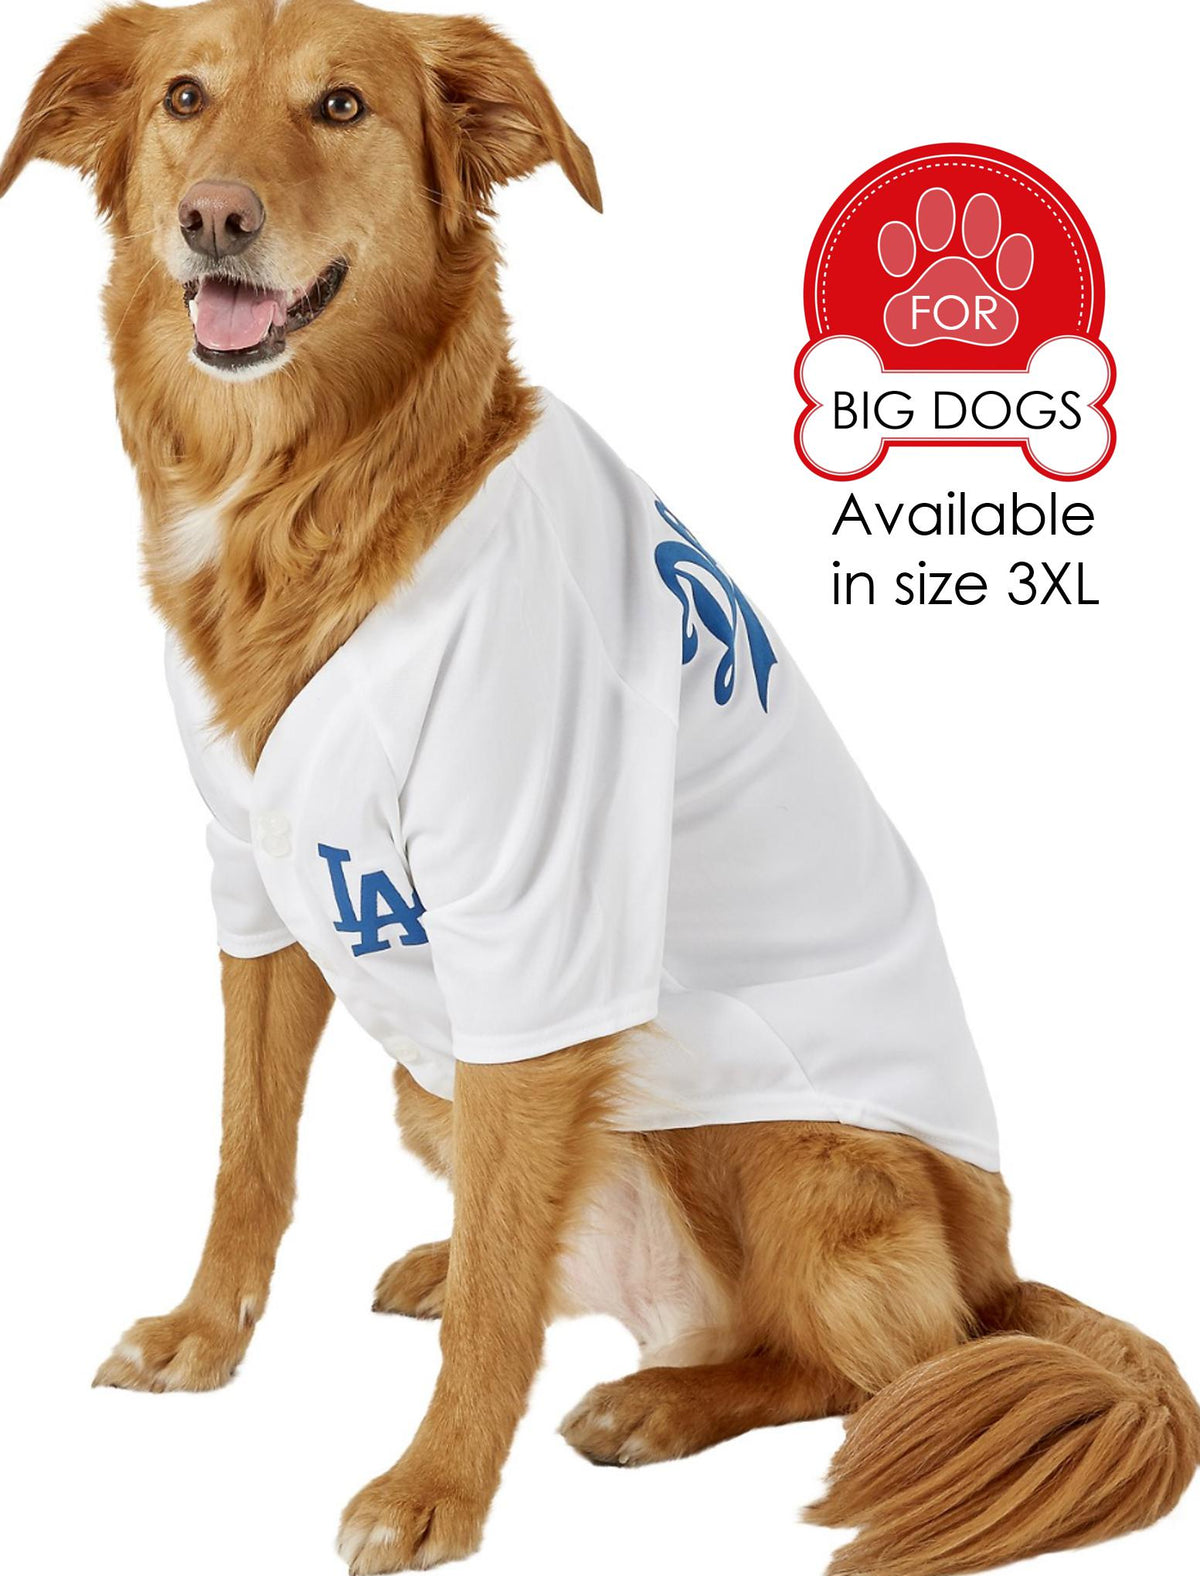 Los Angeles Doggers' Personalized Pet T-Shirt, Black / Small (S)